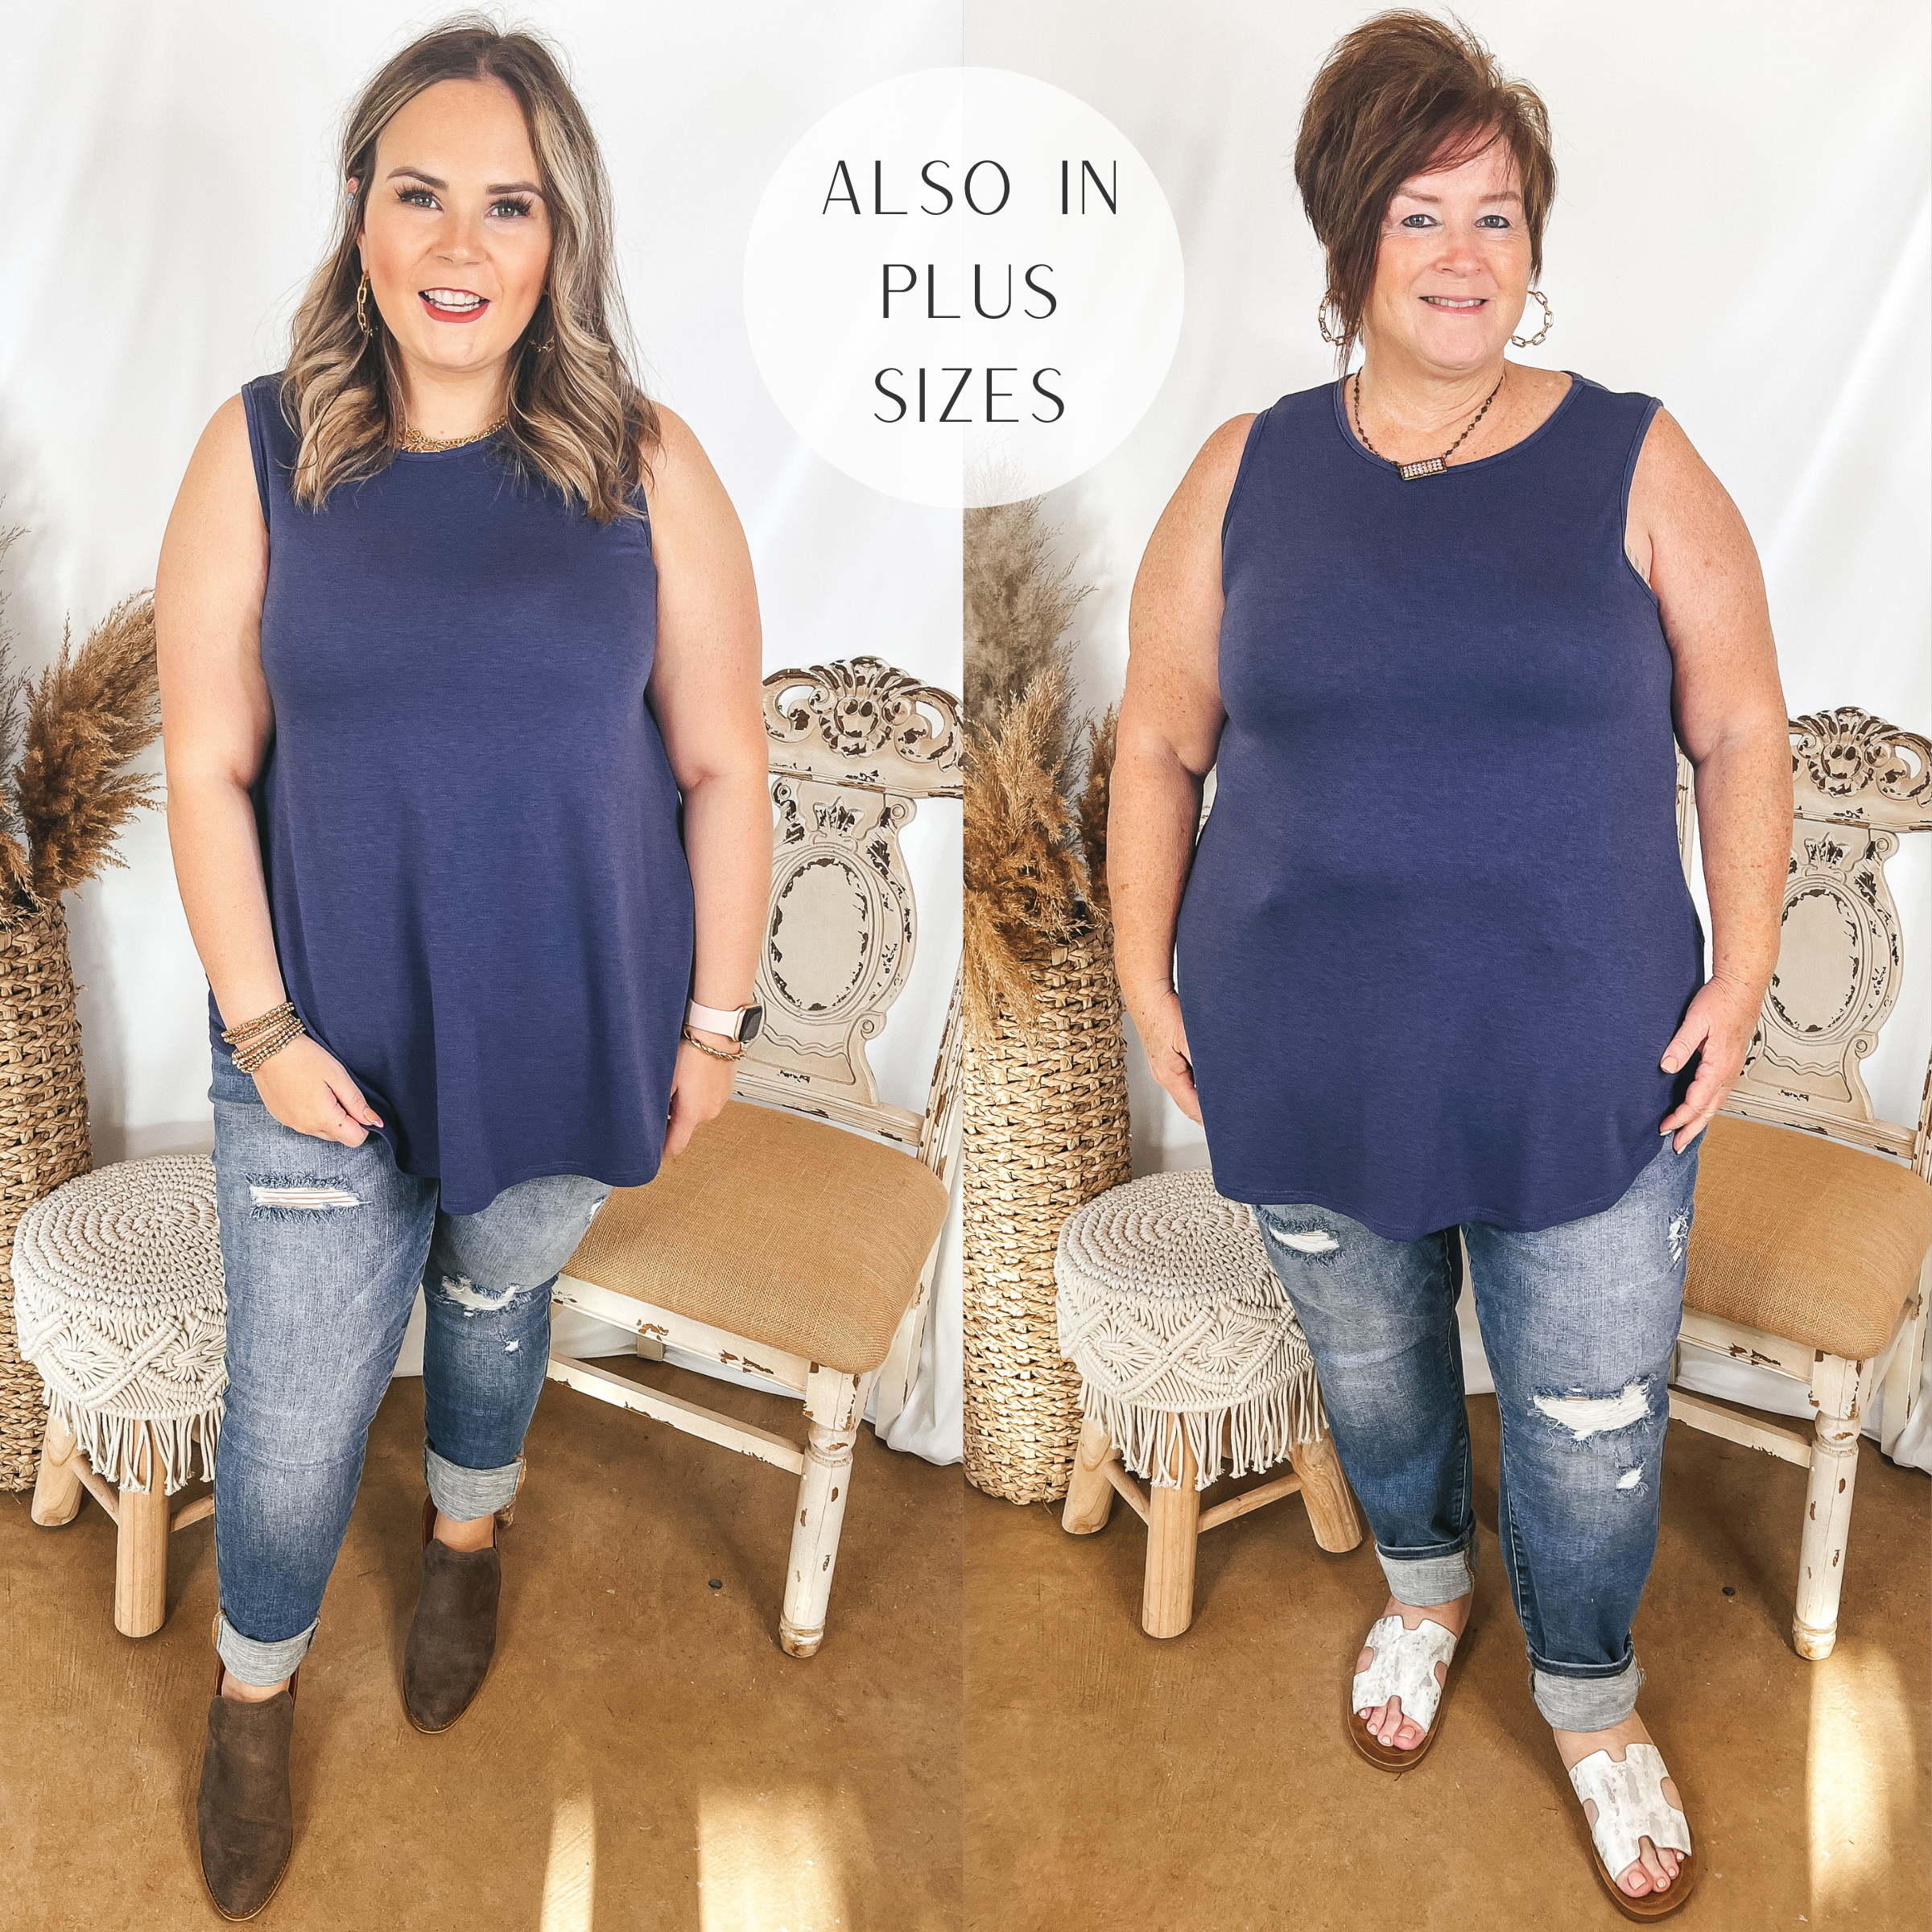 Models are wearing a dusty navy blue tank top. Both models have it paired with medium wash distressed jeans. Size large model has it paired with brown booties and gold jewelry. Plus size model has it paired with white sandals and Pink Panache jewelry.